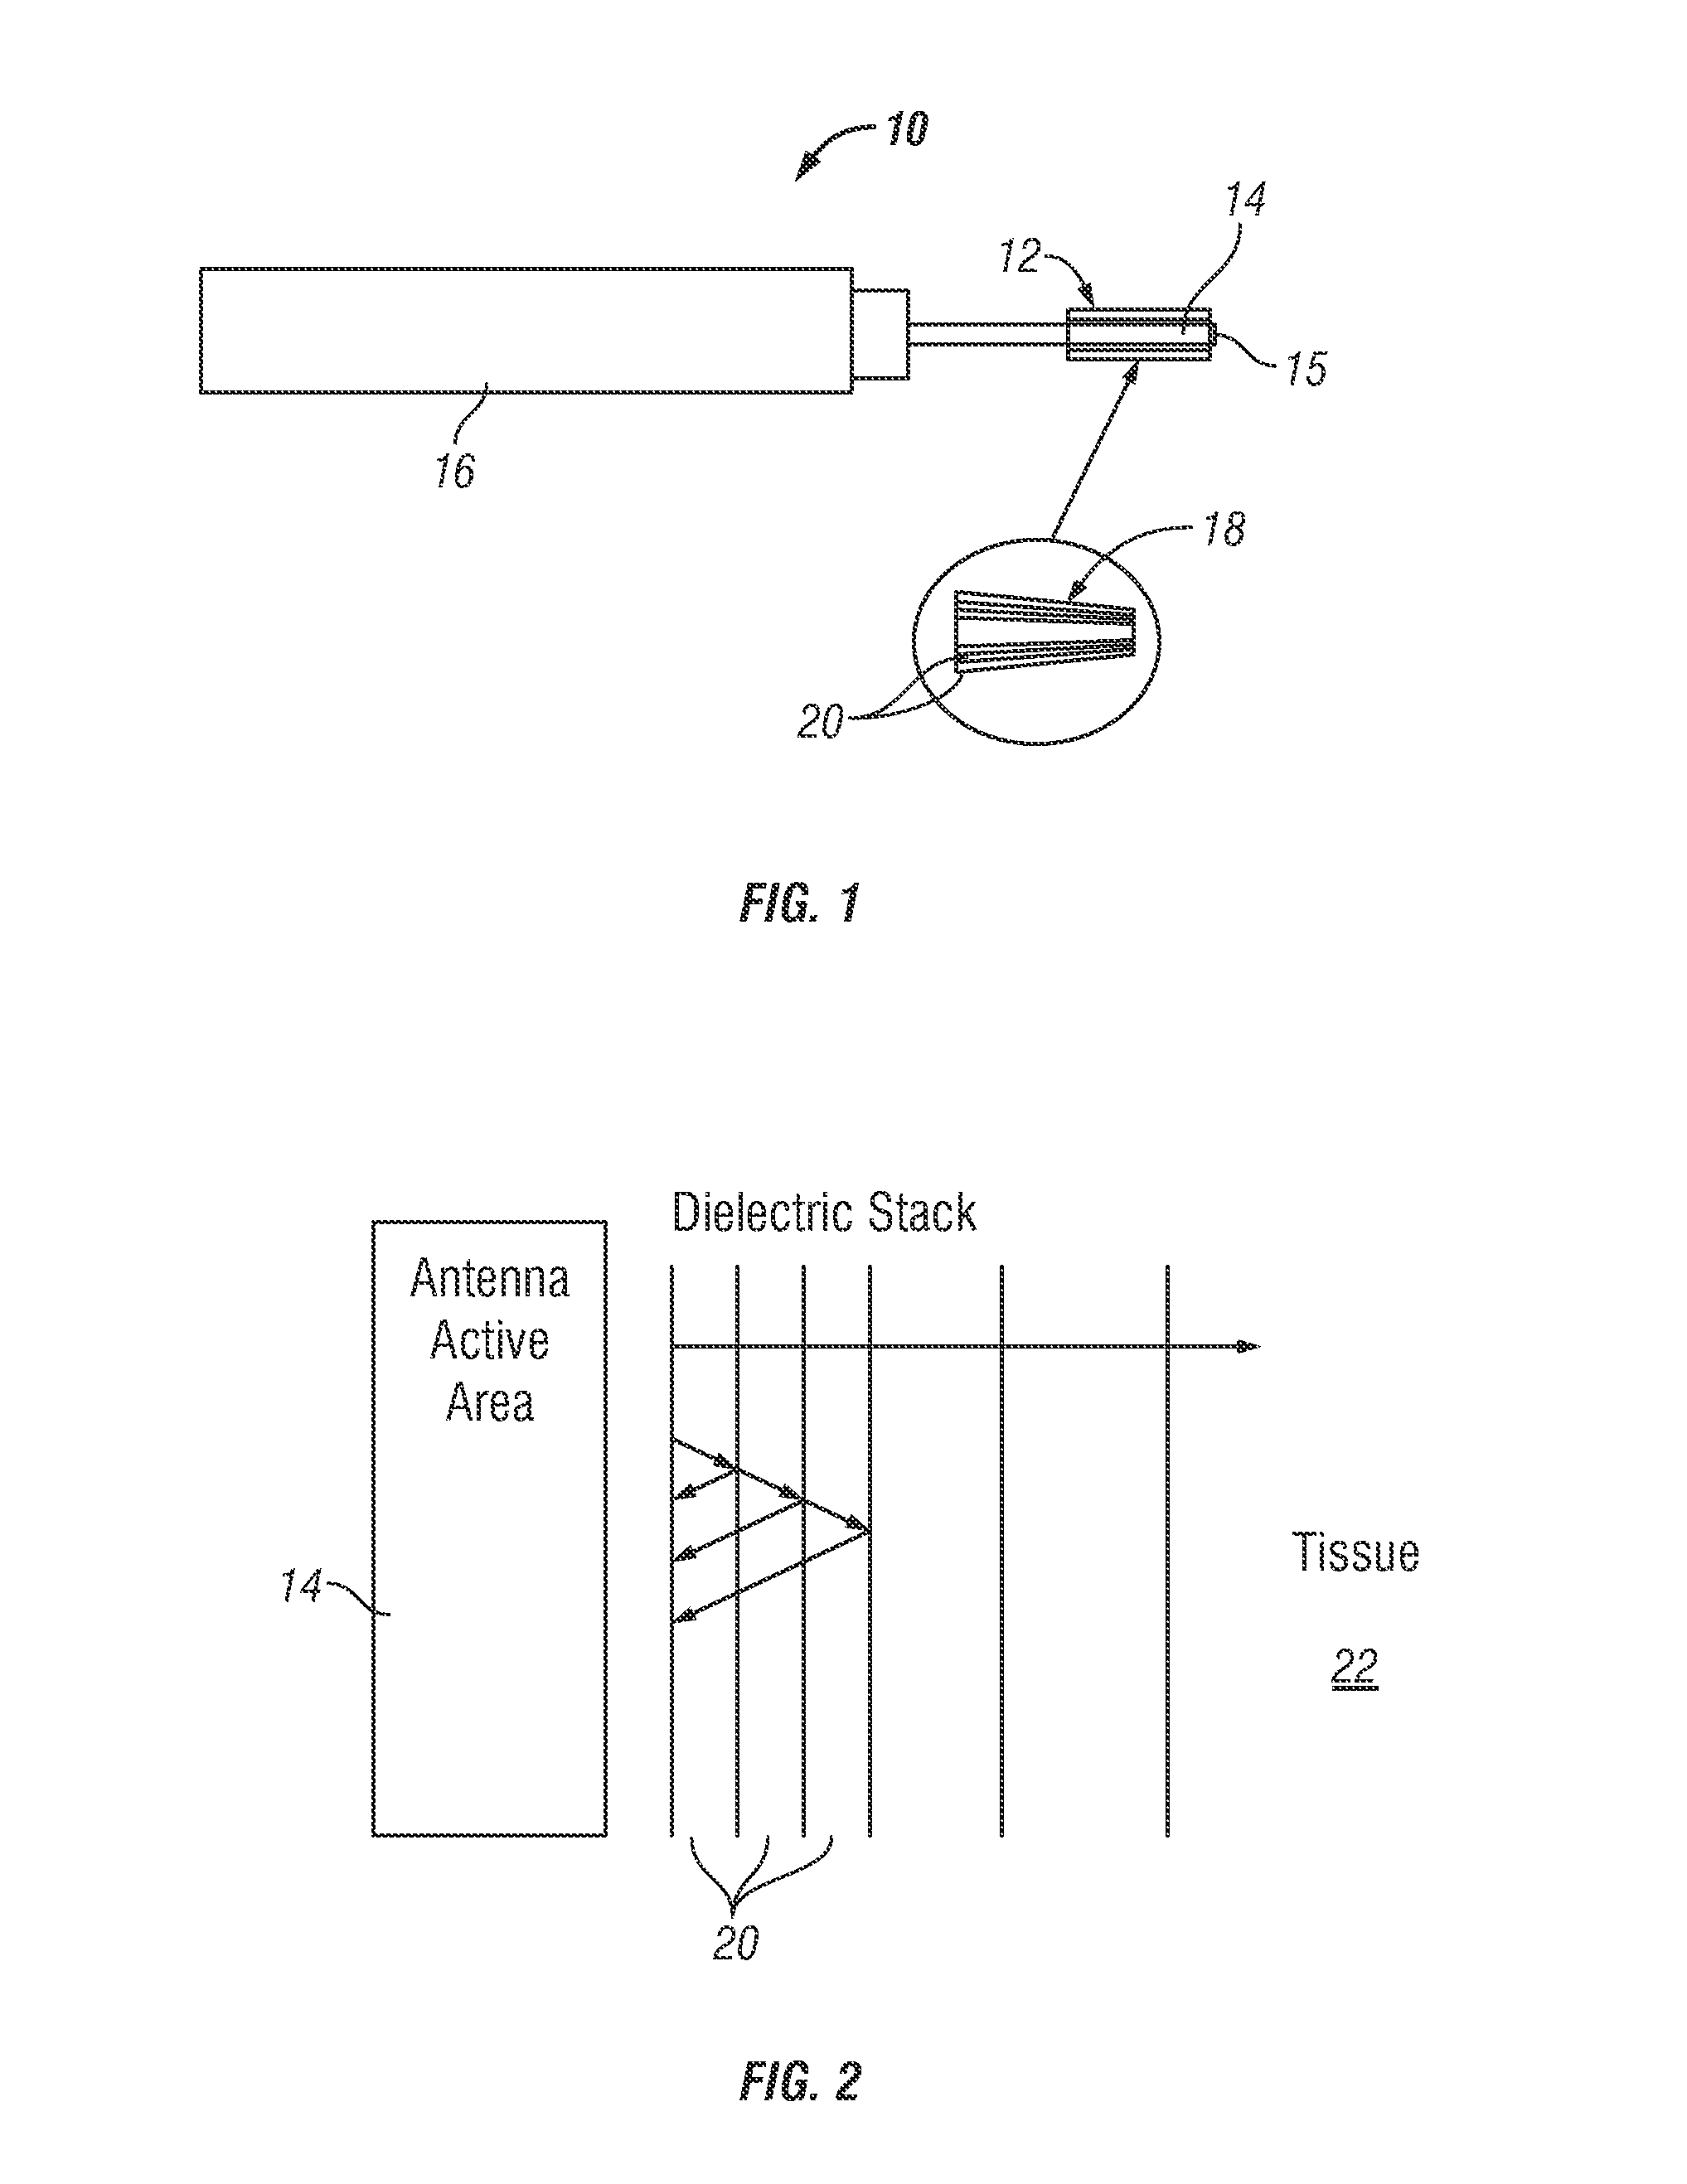 Radio frequency based ablation system and method with dielectric transformer